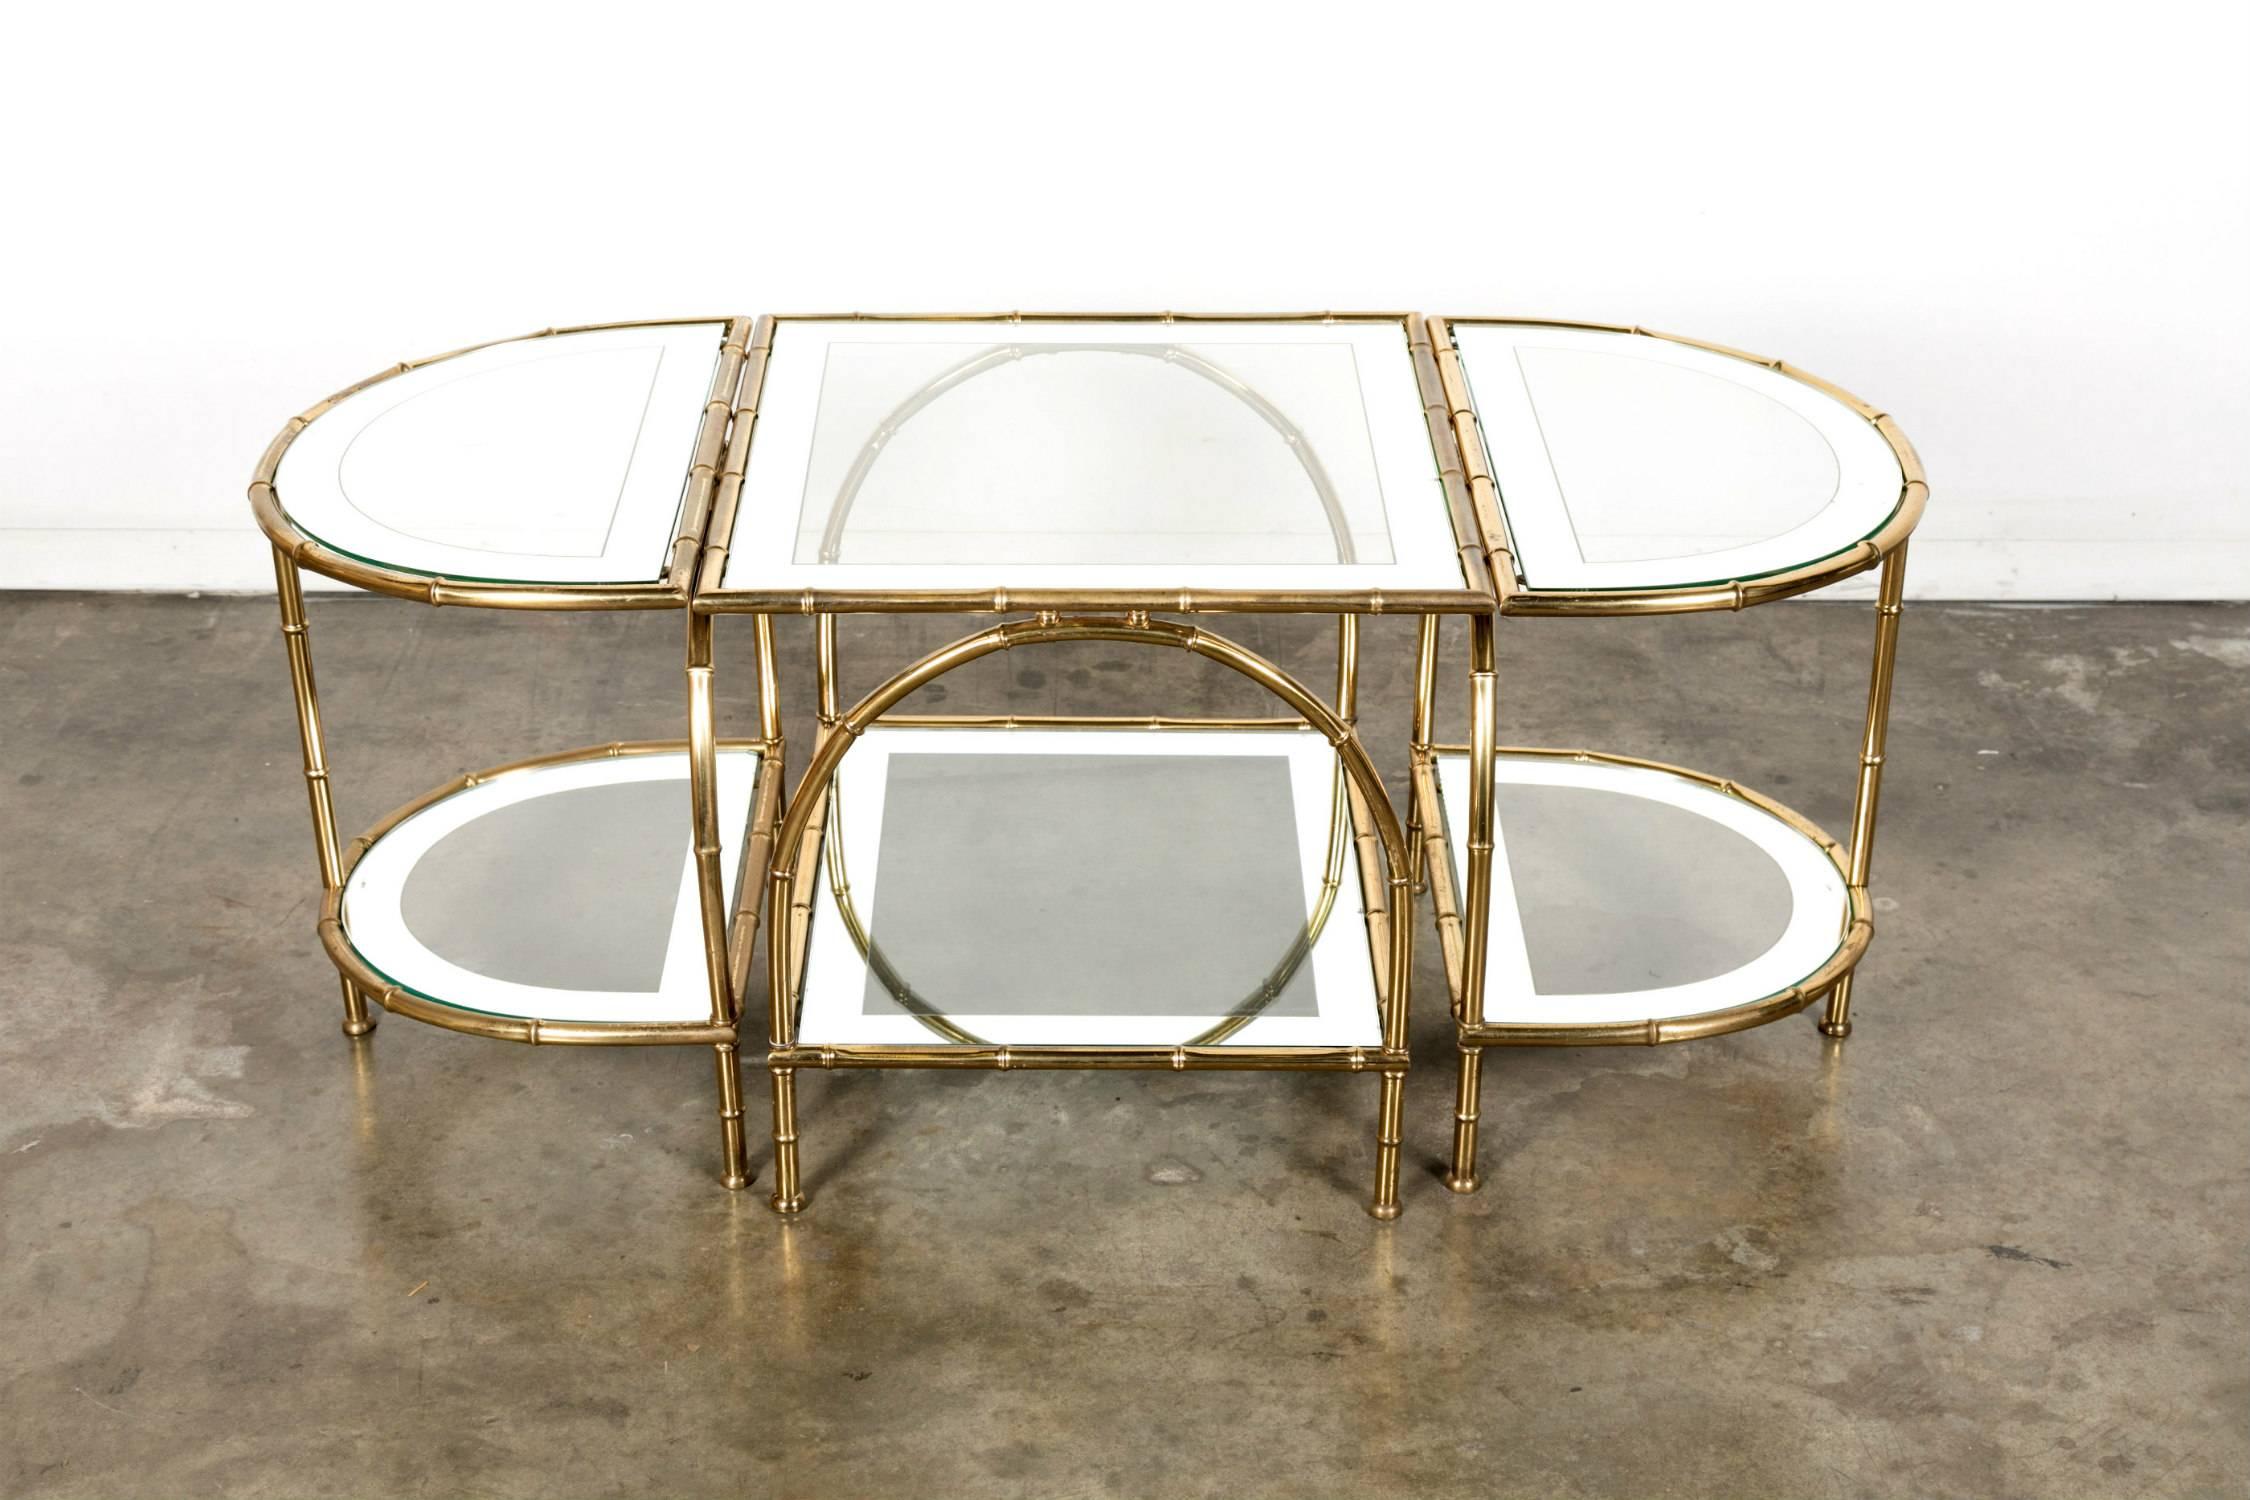 Stunning midcentury faux bamboo brass cocktail or coffee table by renowned French design house Maison Baguès composed of a central table with two demilune side tables that can separate and be used according to size and application as needed. All